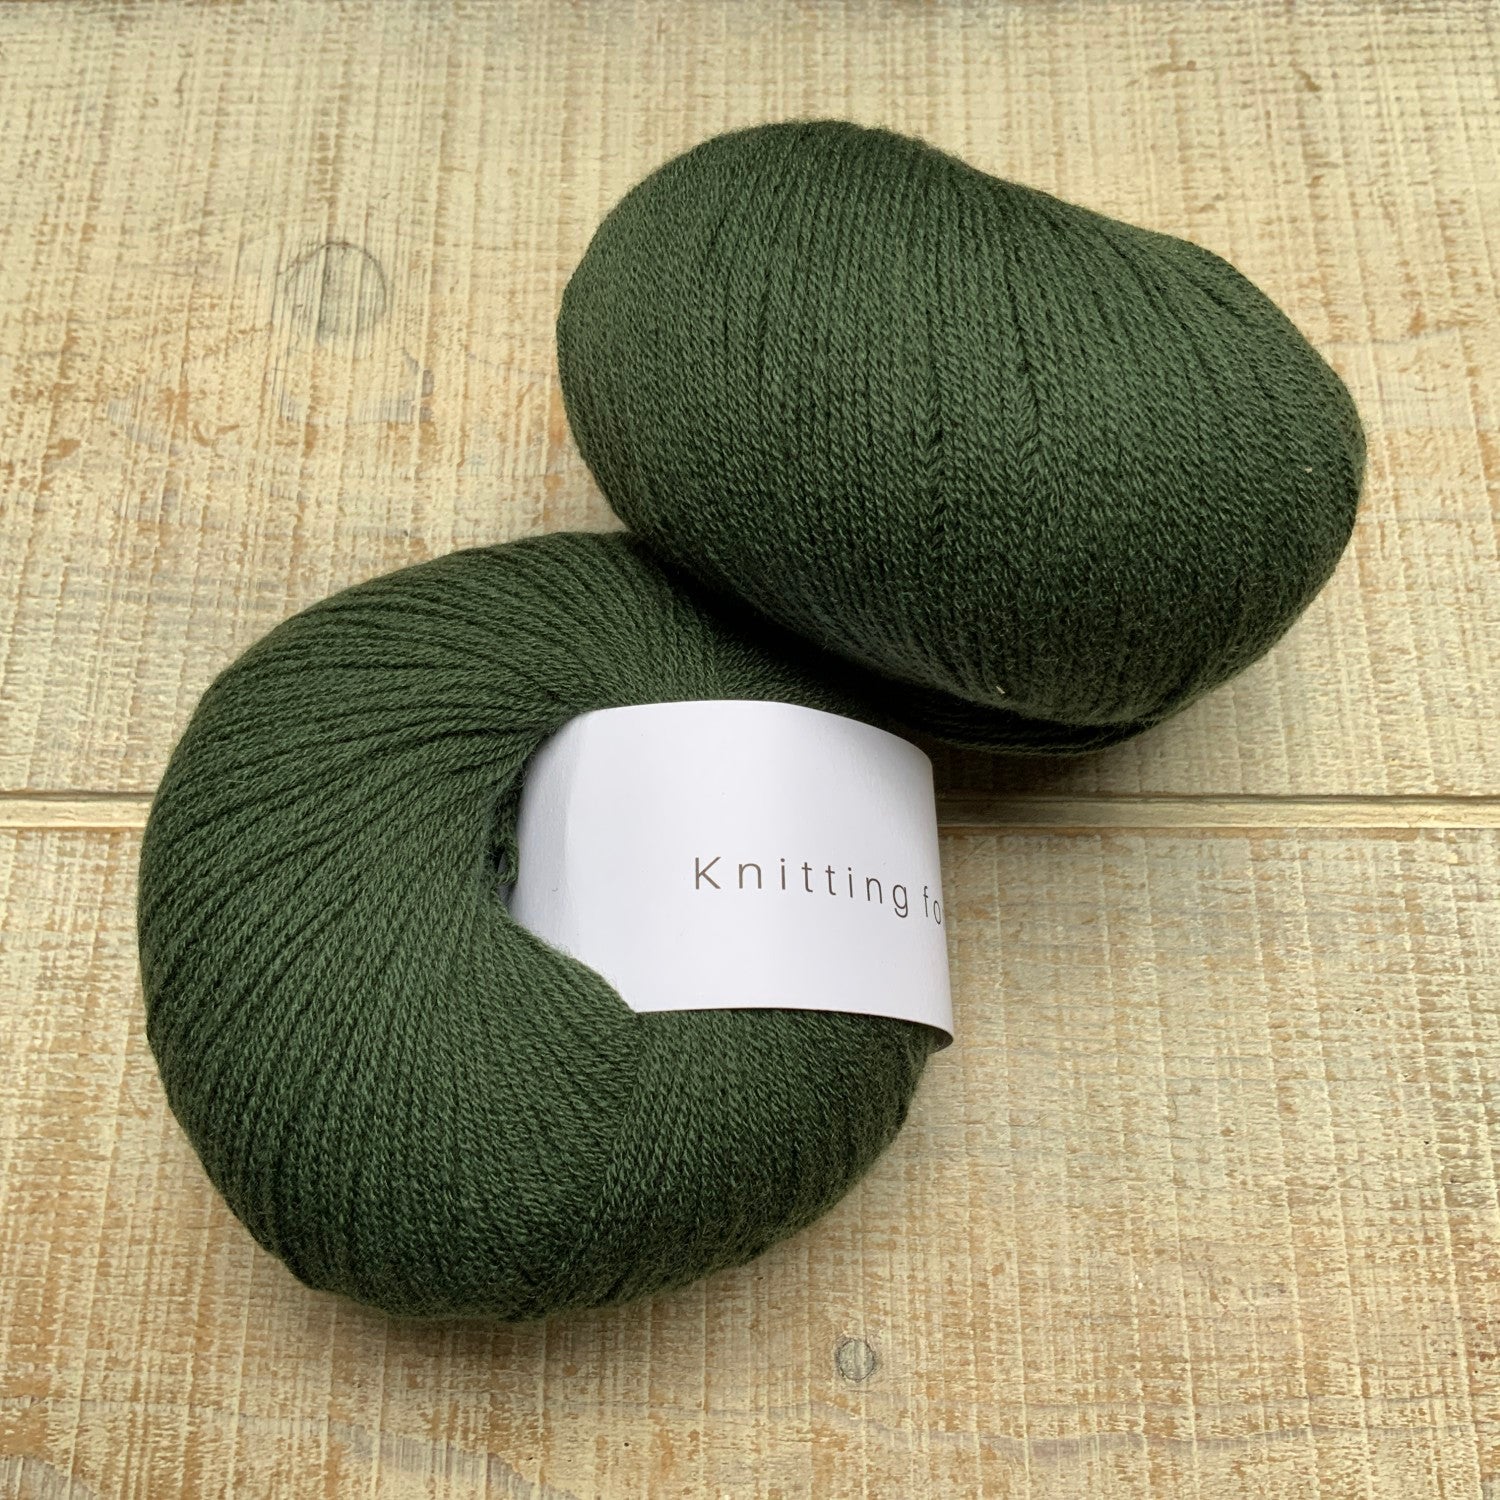 Knitting for Olive Cotton Merino - Wheat –